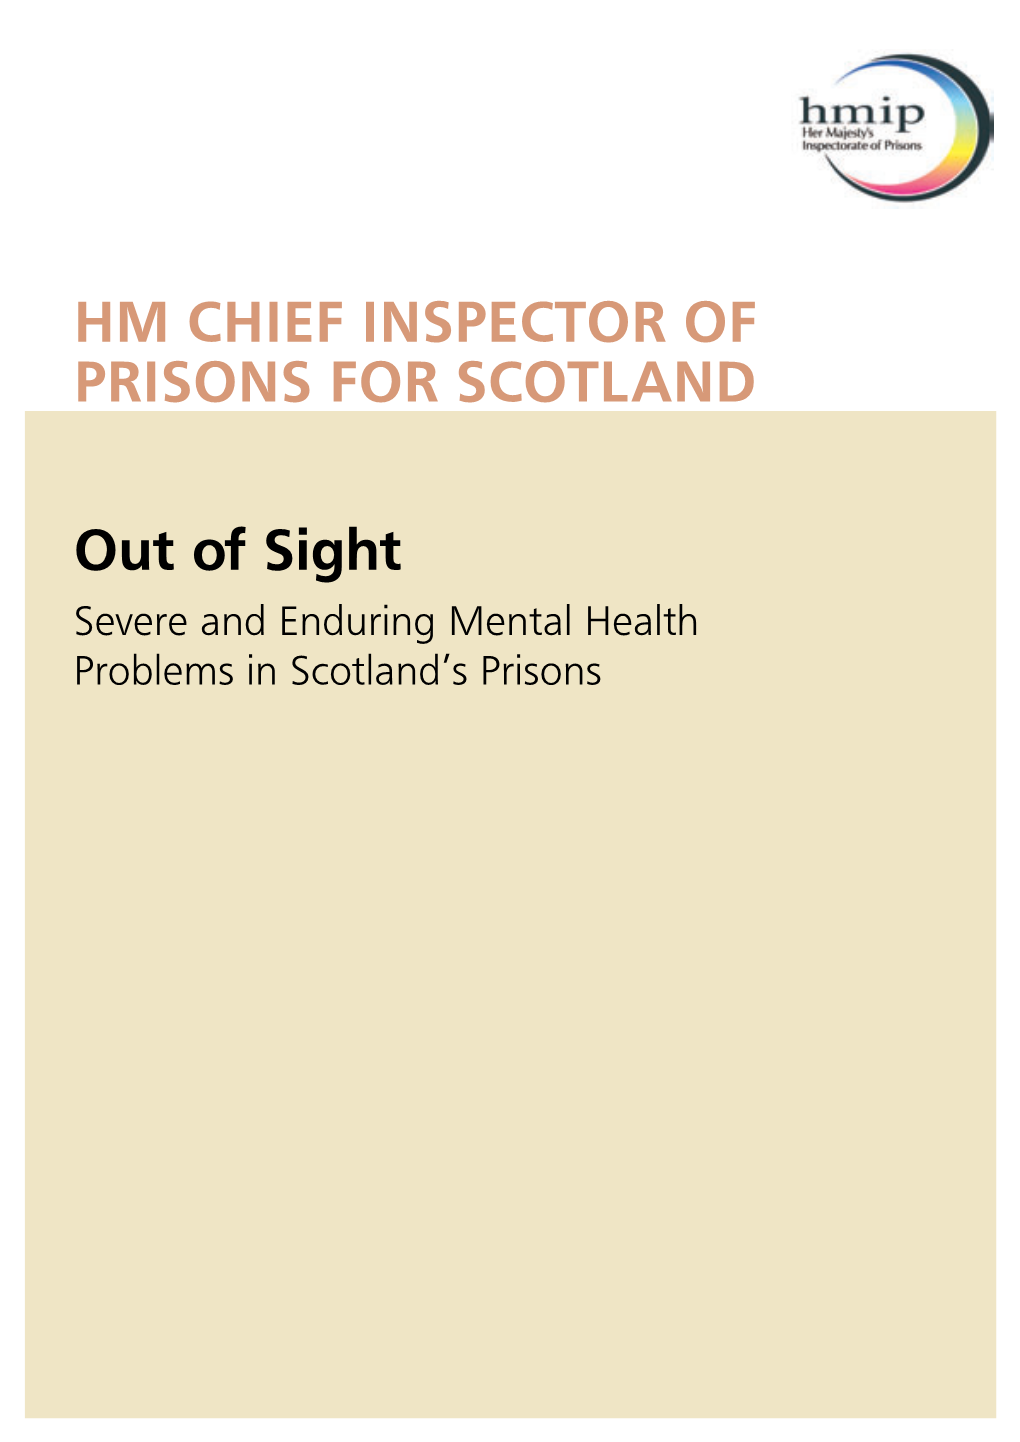 HM Chief Inspector of Prisons for Scotland: out of Sight